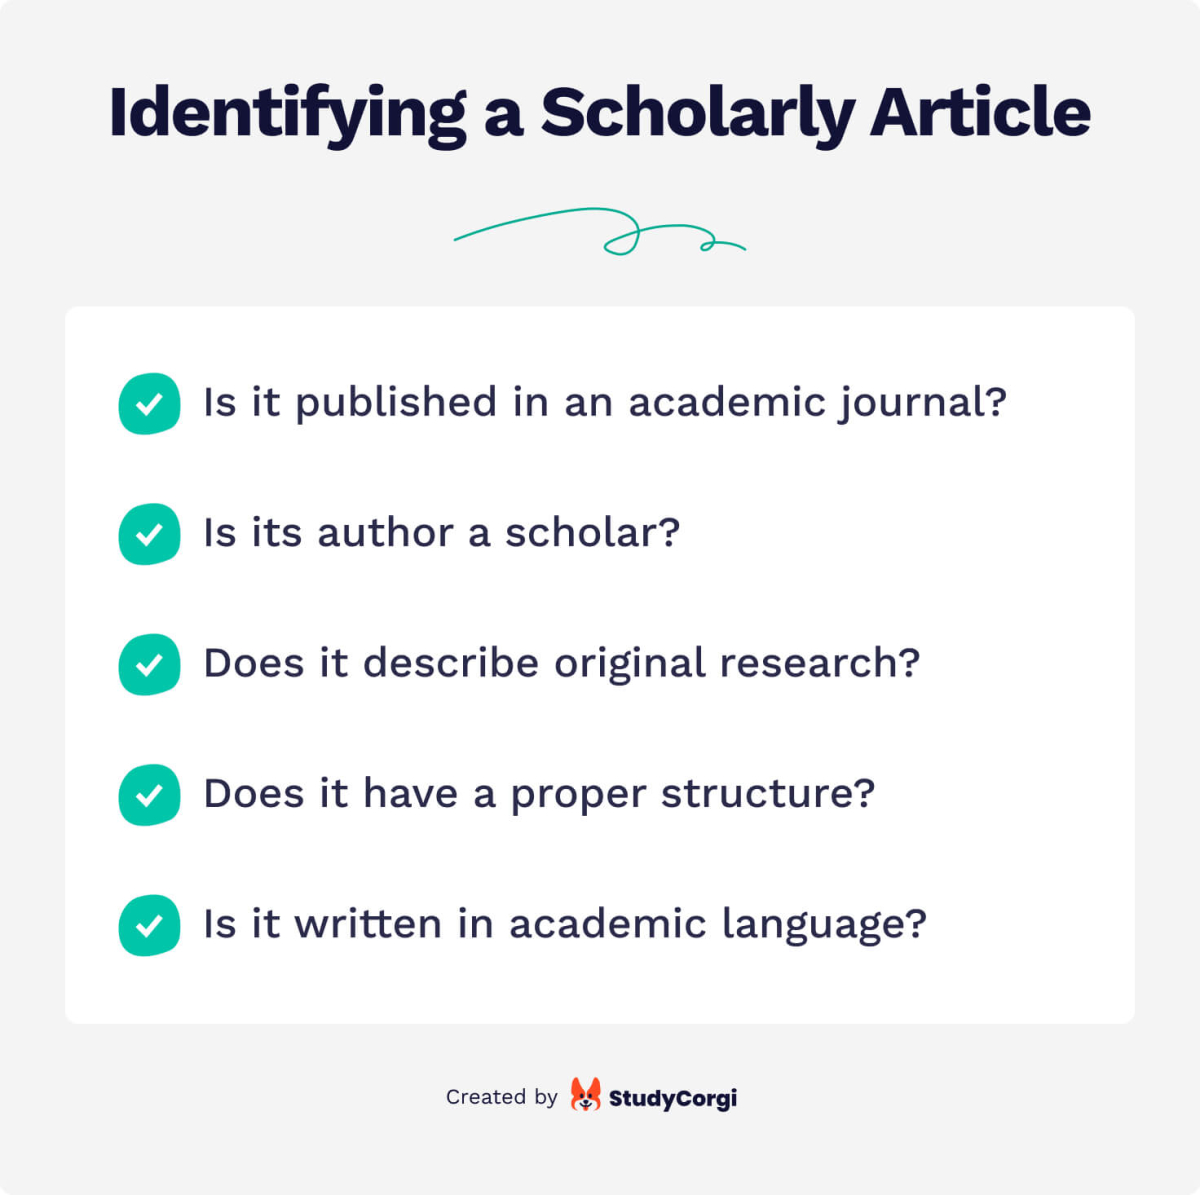 The picture contains a checklist to help you identify a scholarly article worth citing. 